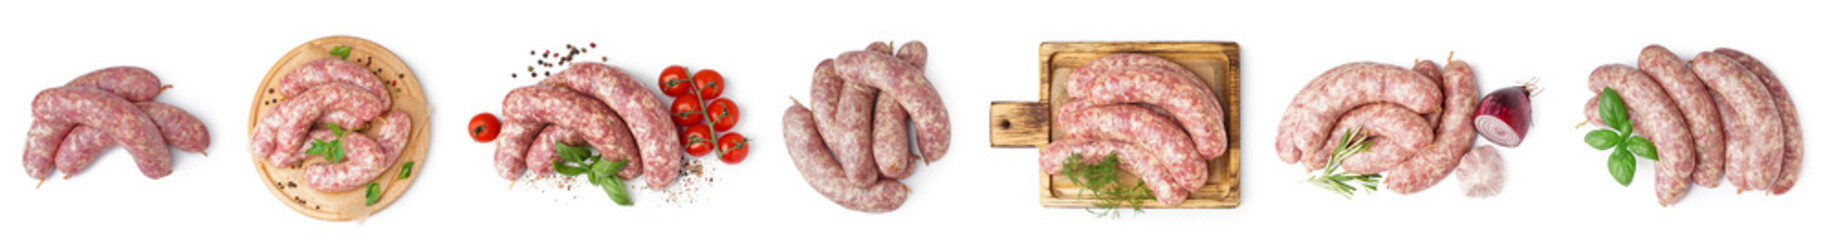 Collage of raw sausages on white background, top view